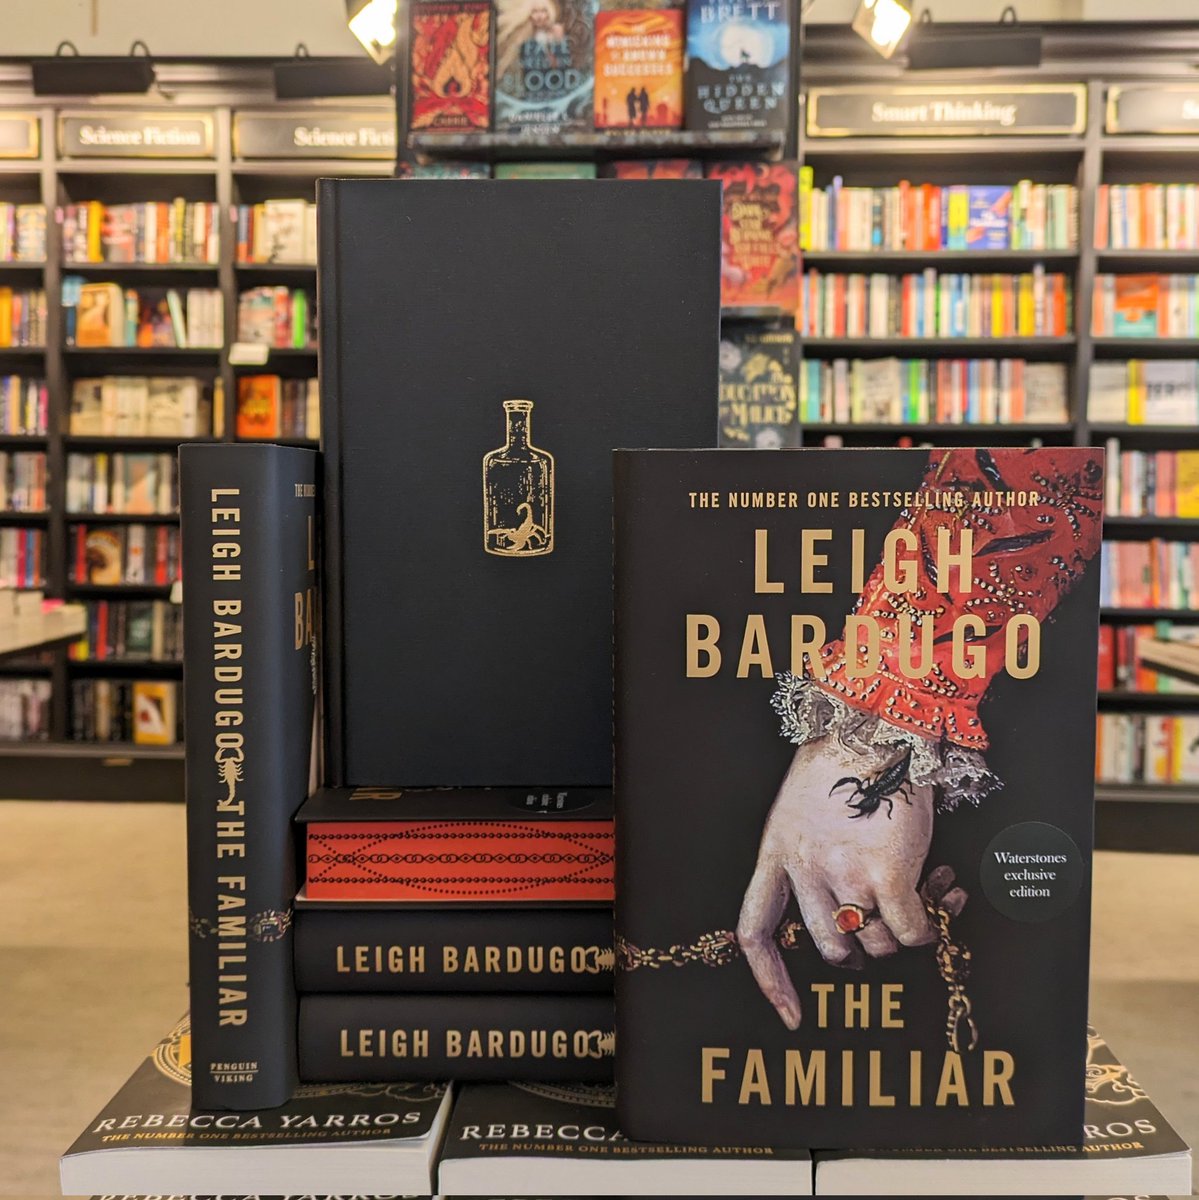 From the bestselling author of Ninth House comes a scintillating new dark fantasy set during Spain's golden age, as a servant girl with magical powers looks to hide her Jewish blood from the deadly gaze of the inquisition. #waterstones #thefamiliar #leighbardugo